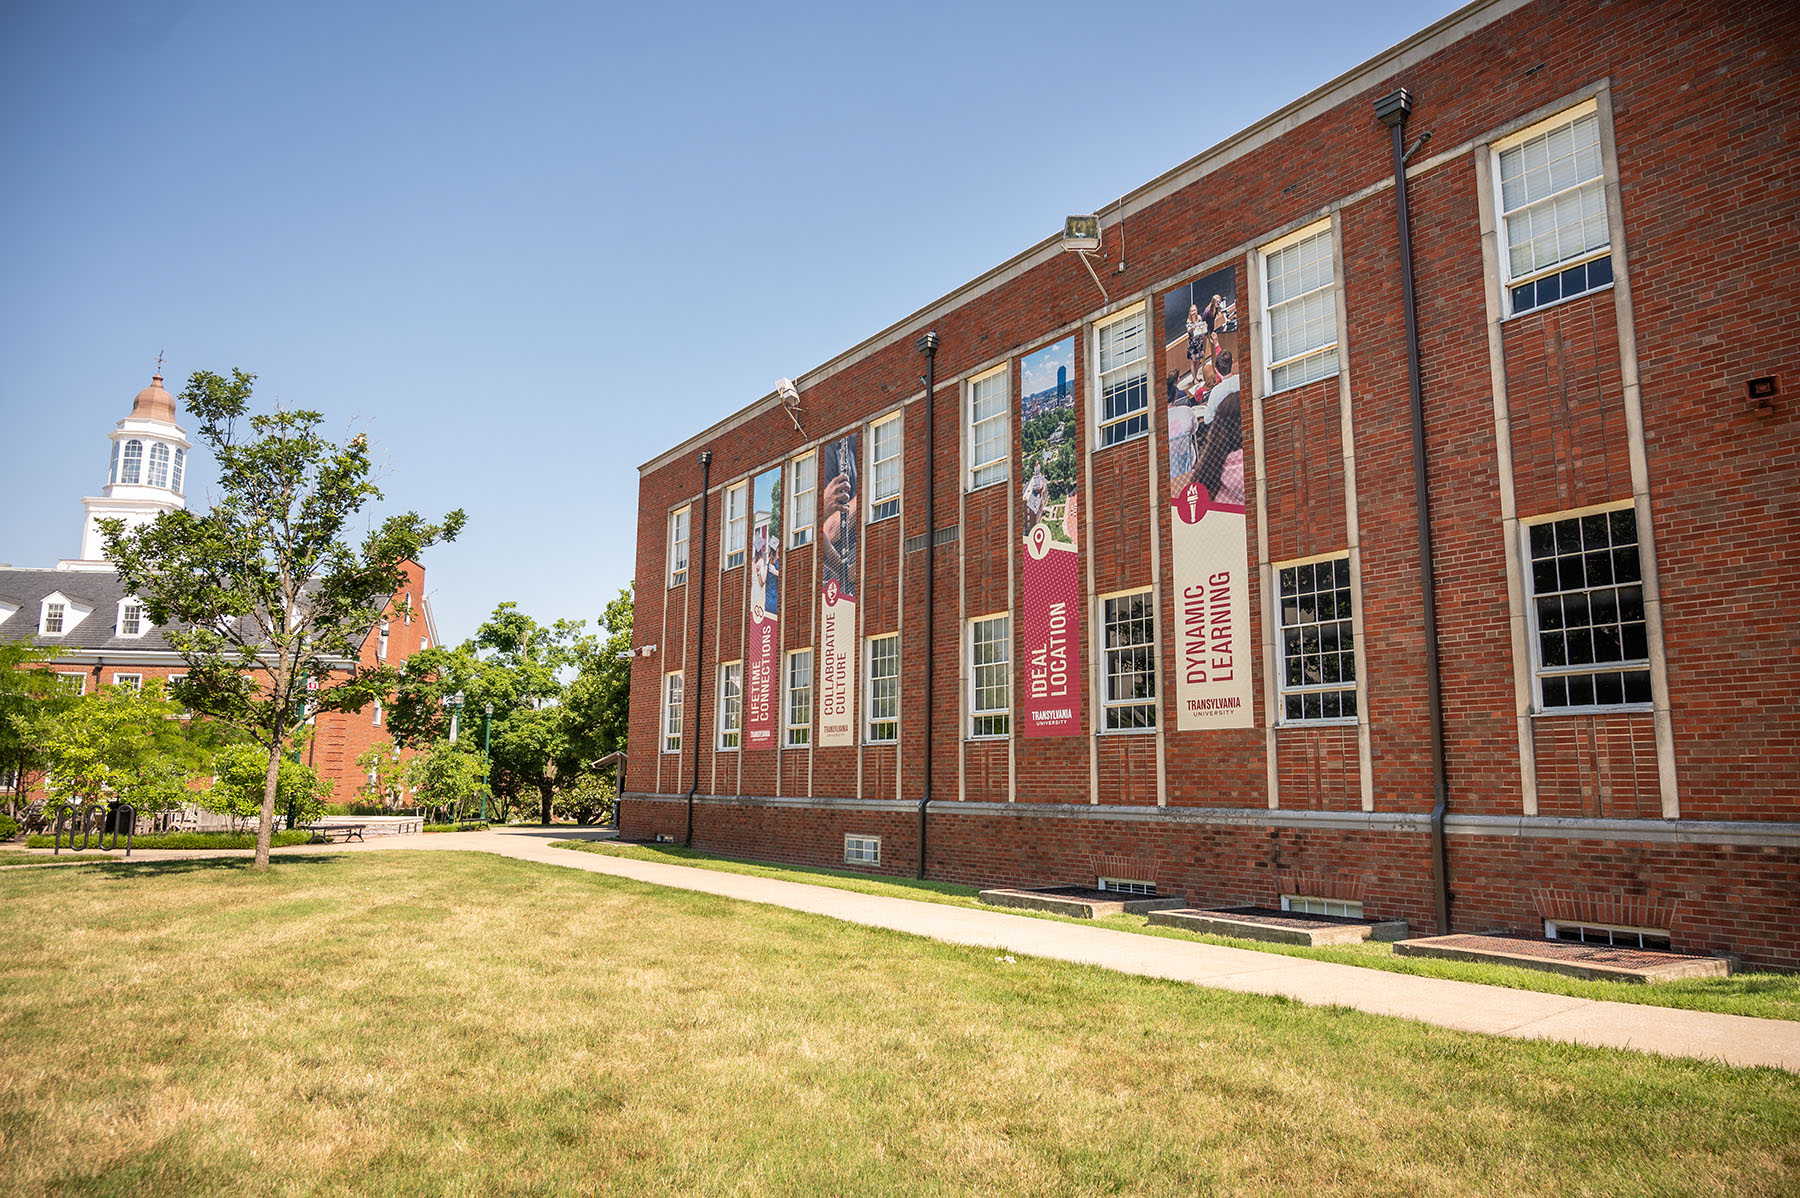 Campus banners on the Mitchell Fine Arts building.